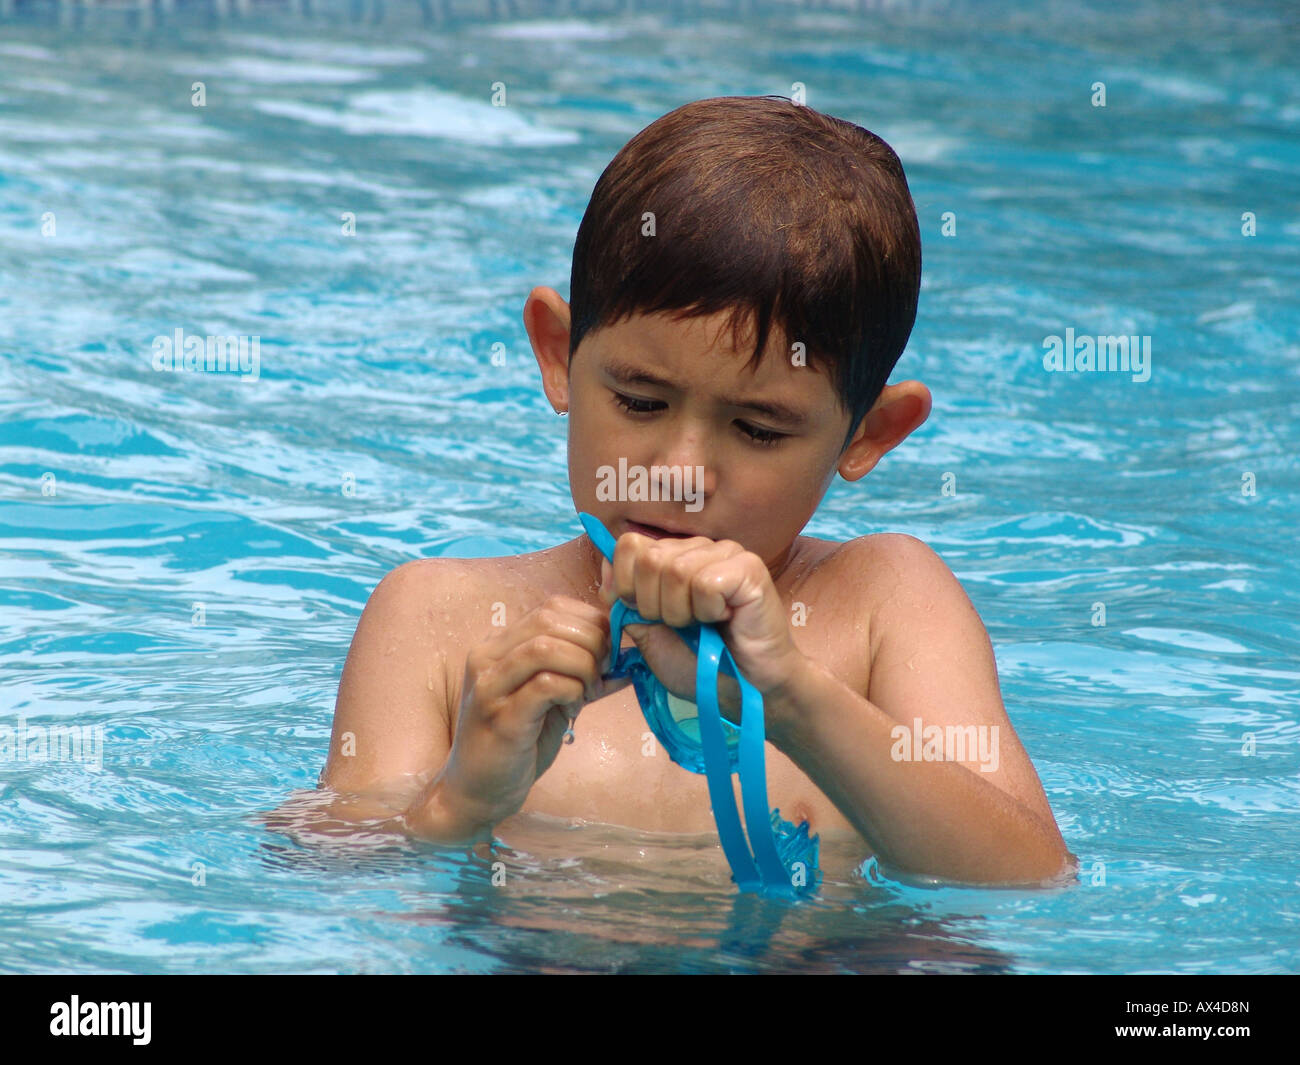 A young boy  with swimming gogles in the pool, spain Stock Photo